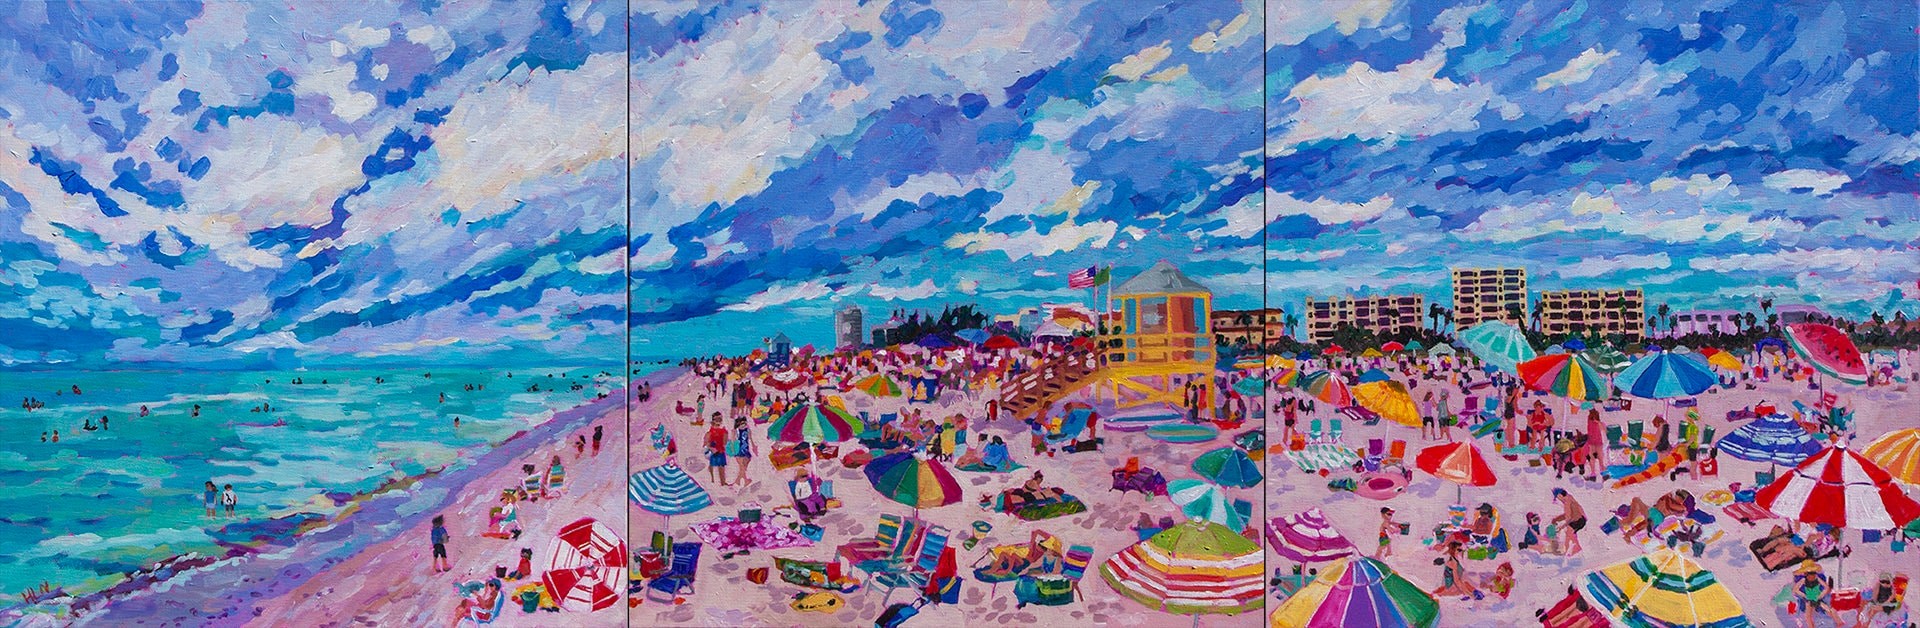 Crowded panoramic beach scene filled with umbrellas and people on beach